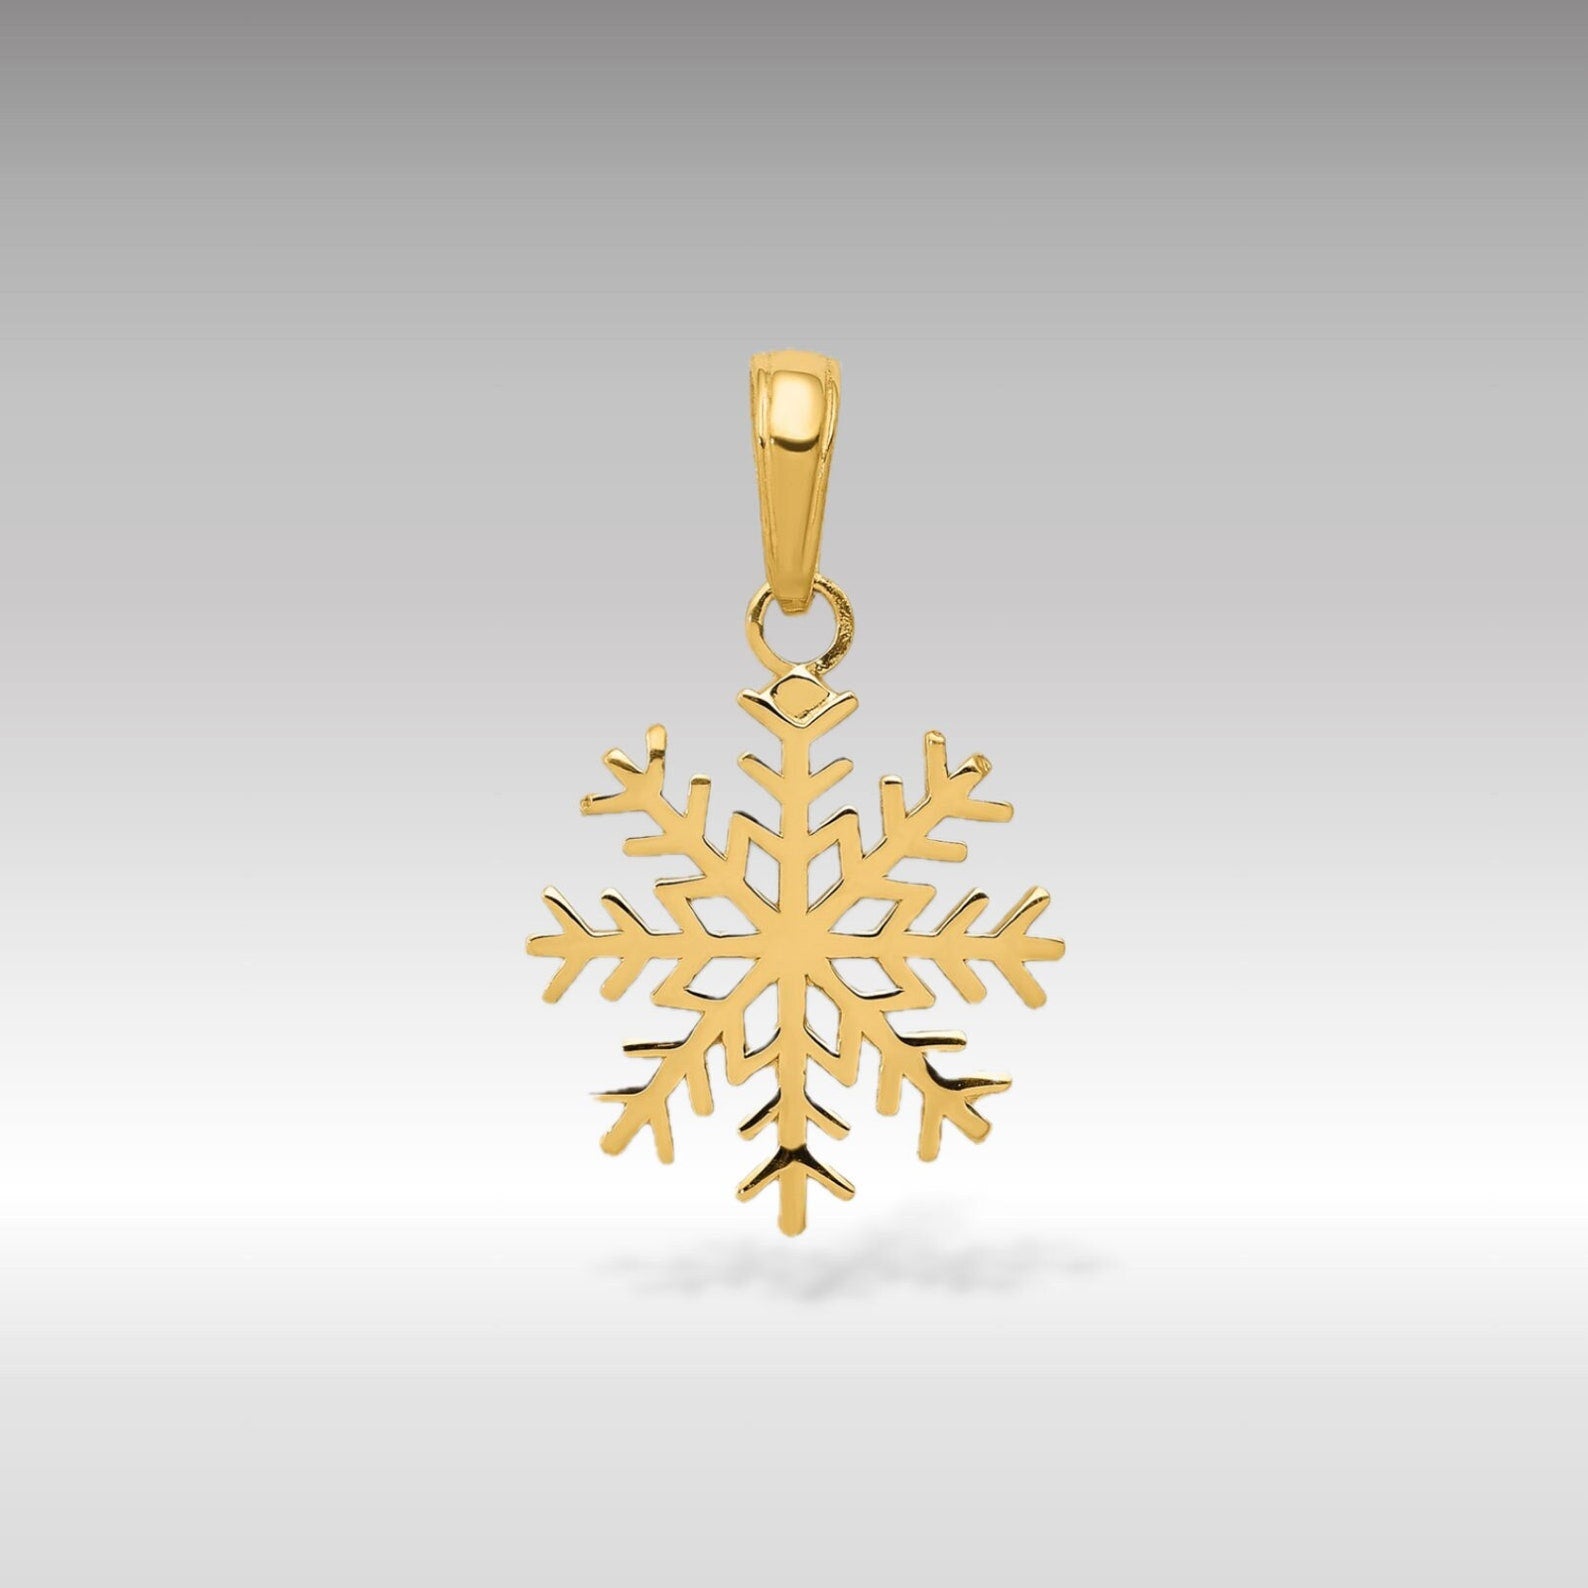 Yellow Gold Intricate Snowflake Charm Model-C3062 - Charlie & Co. Jewelry